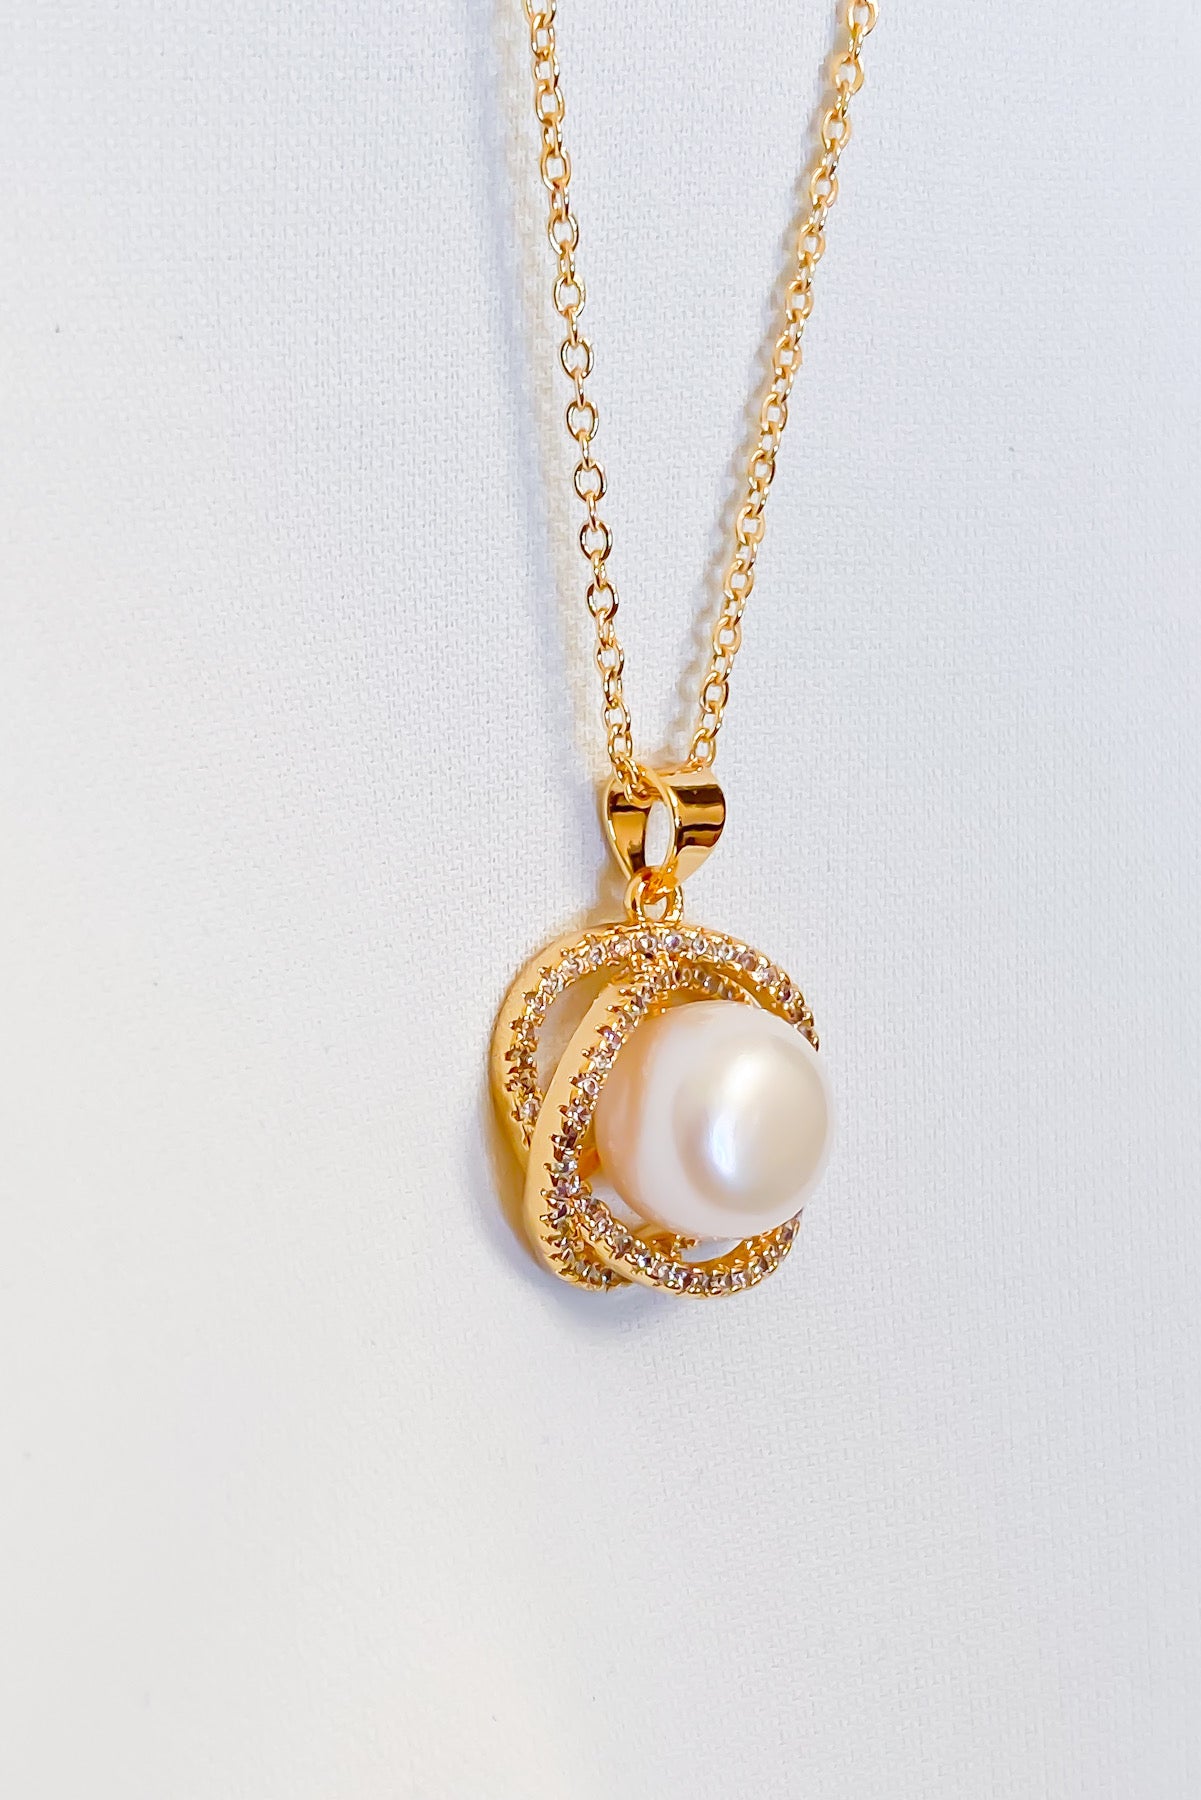 The pearl necklace a classic | order from Elli – Elli Jewelry